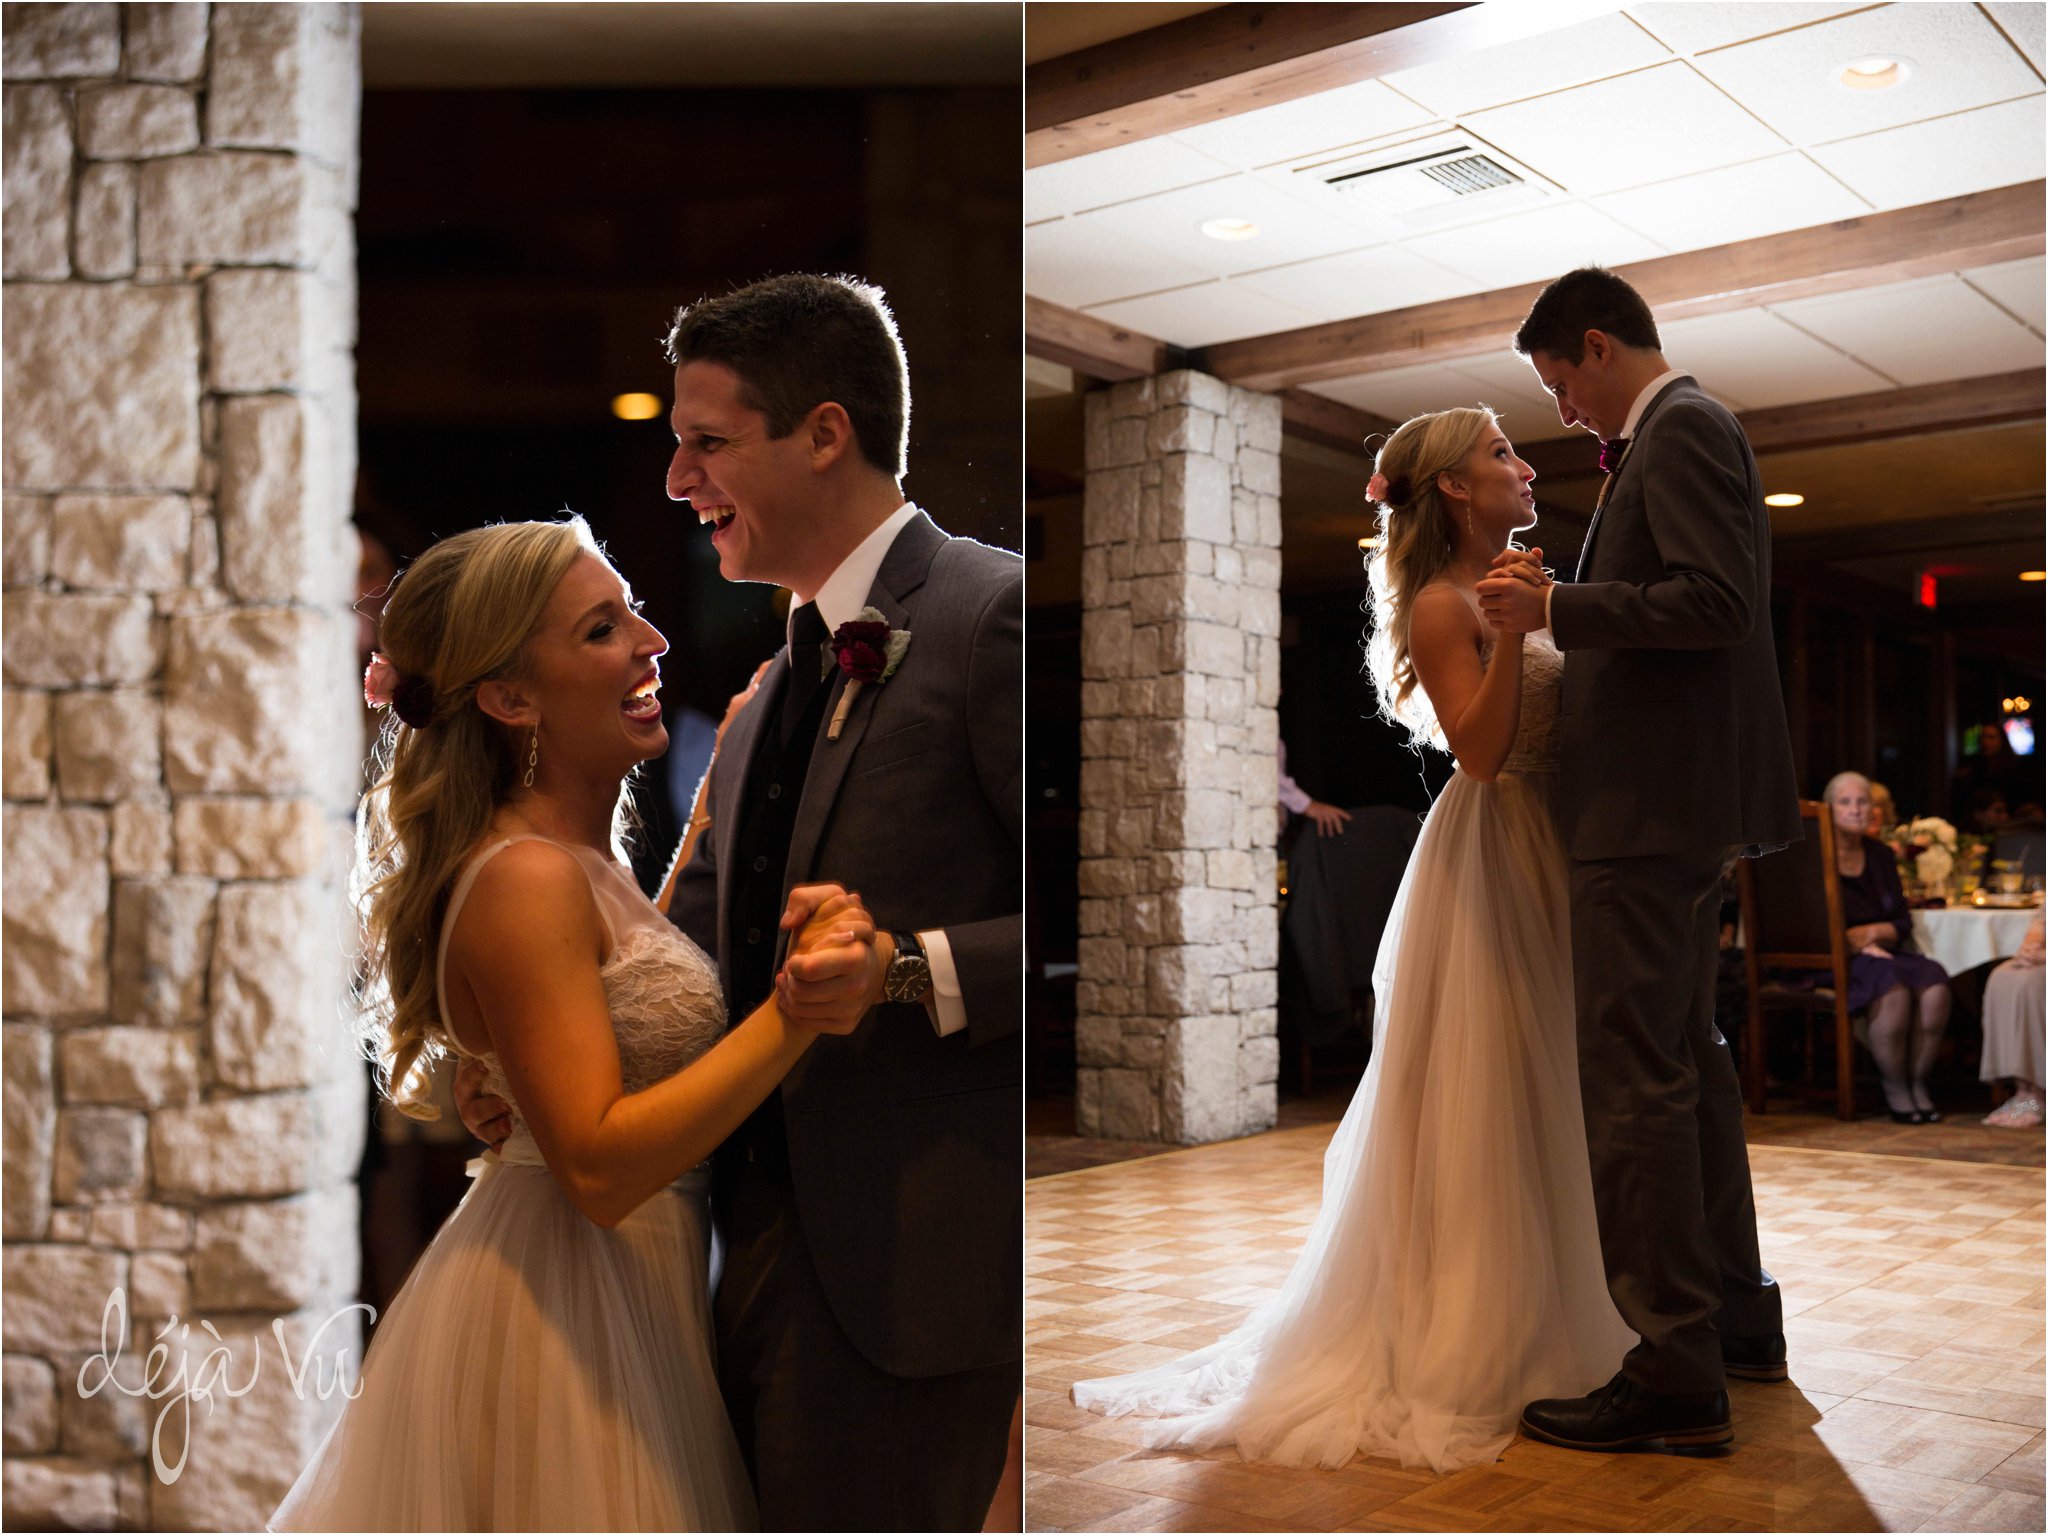 Shadow Glen Country Club Wedding | bride and groom first dance | Images by: www.feliciathephotographer.com